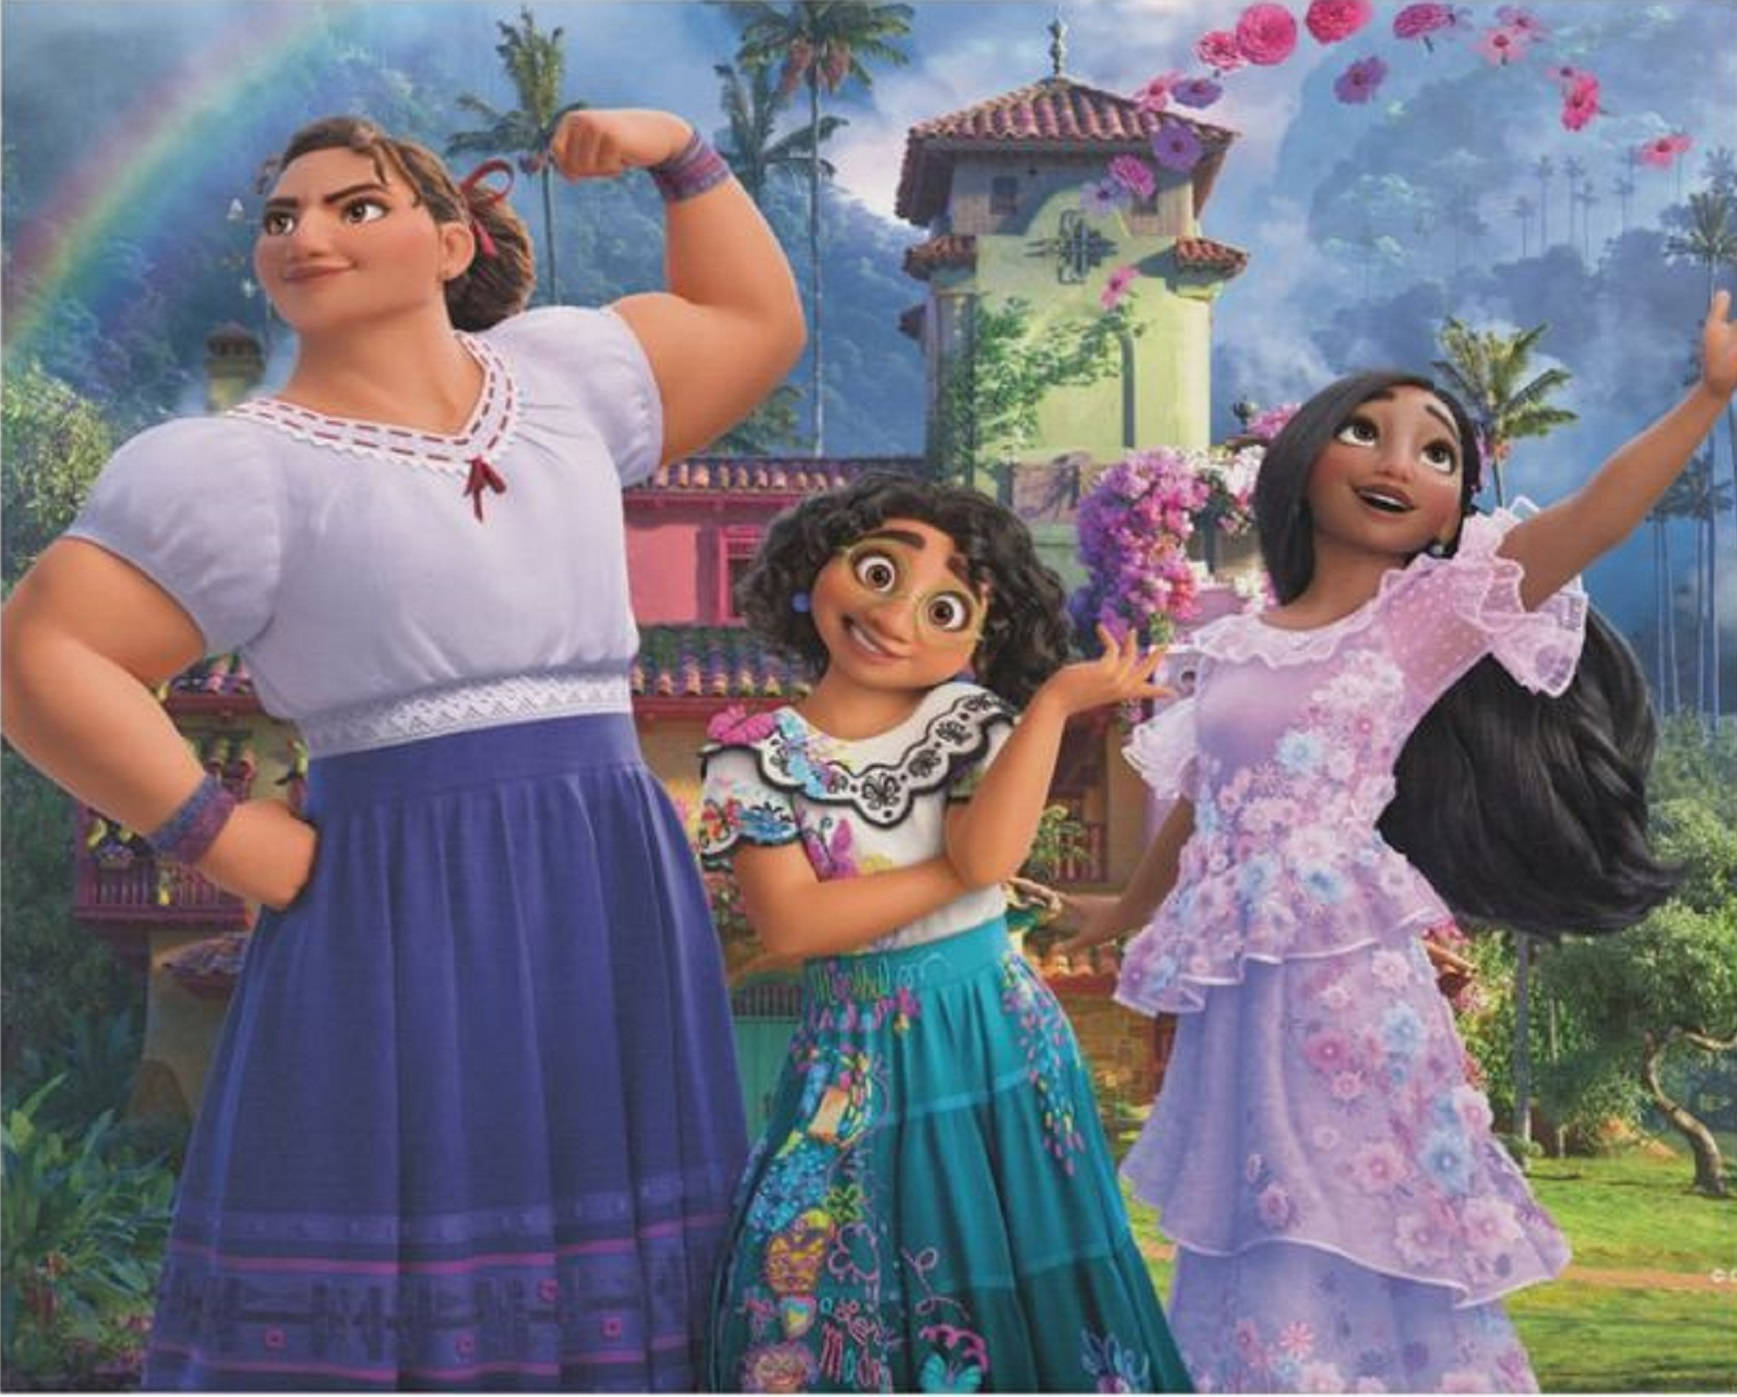 Luisa Madrigal from the movie Encanto surrounded by her little sisters Wallpaper